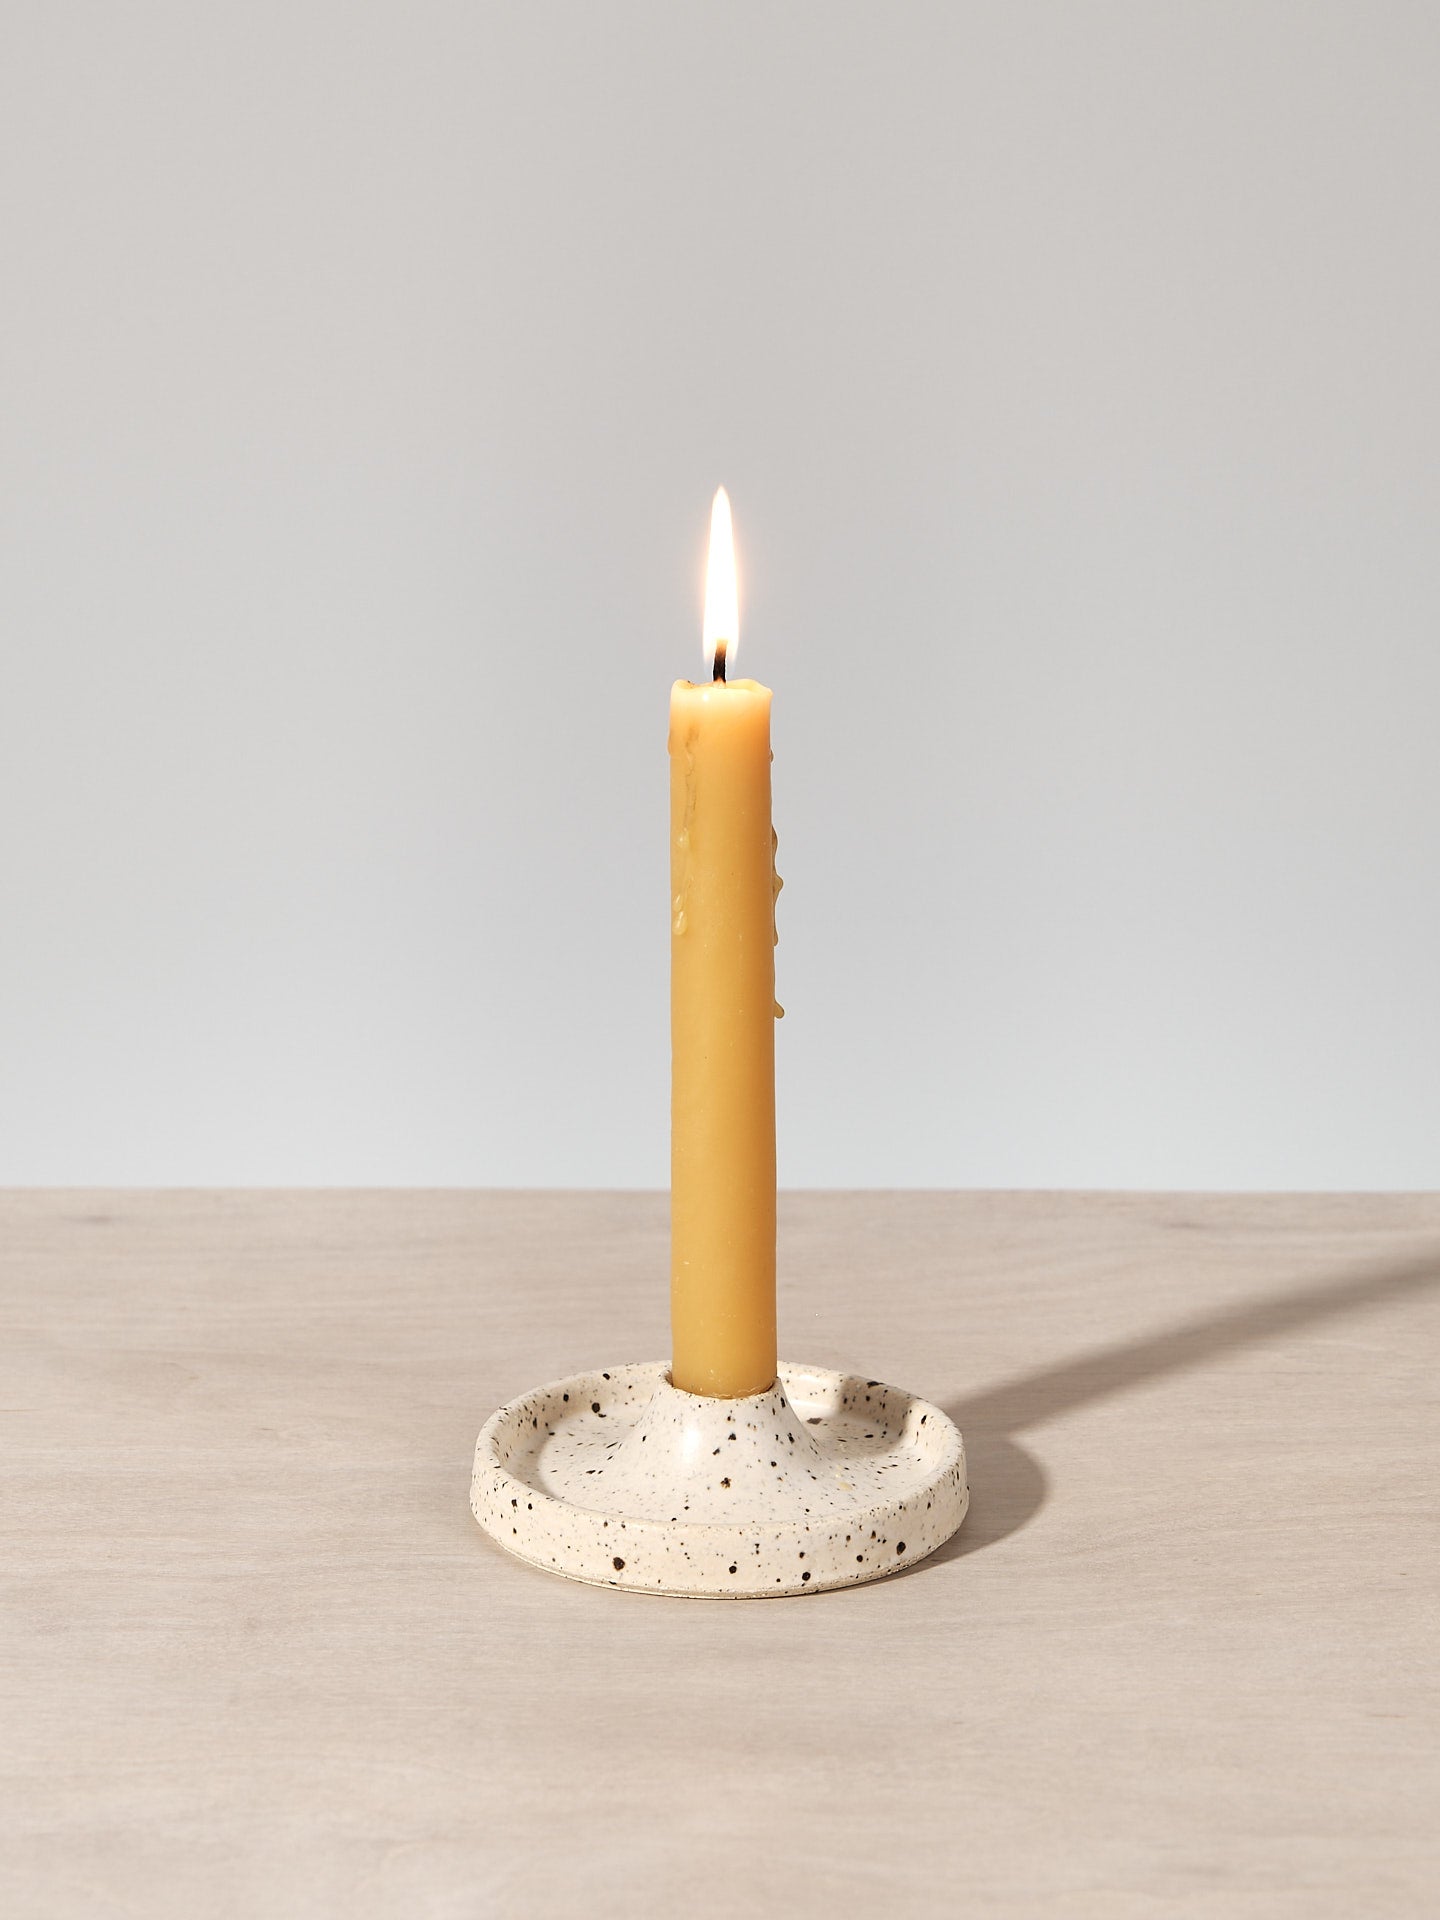 A deborah sweeney Candle Holder – Toi Toi is sitting on top of a wooden table.